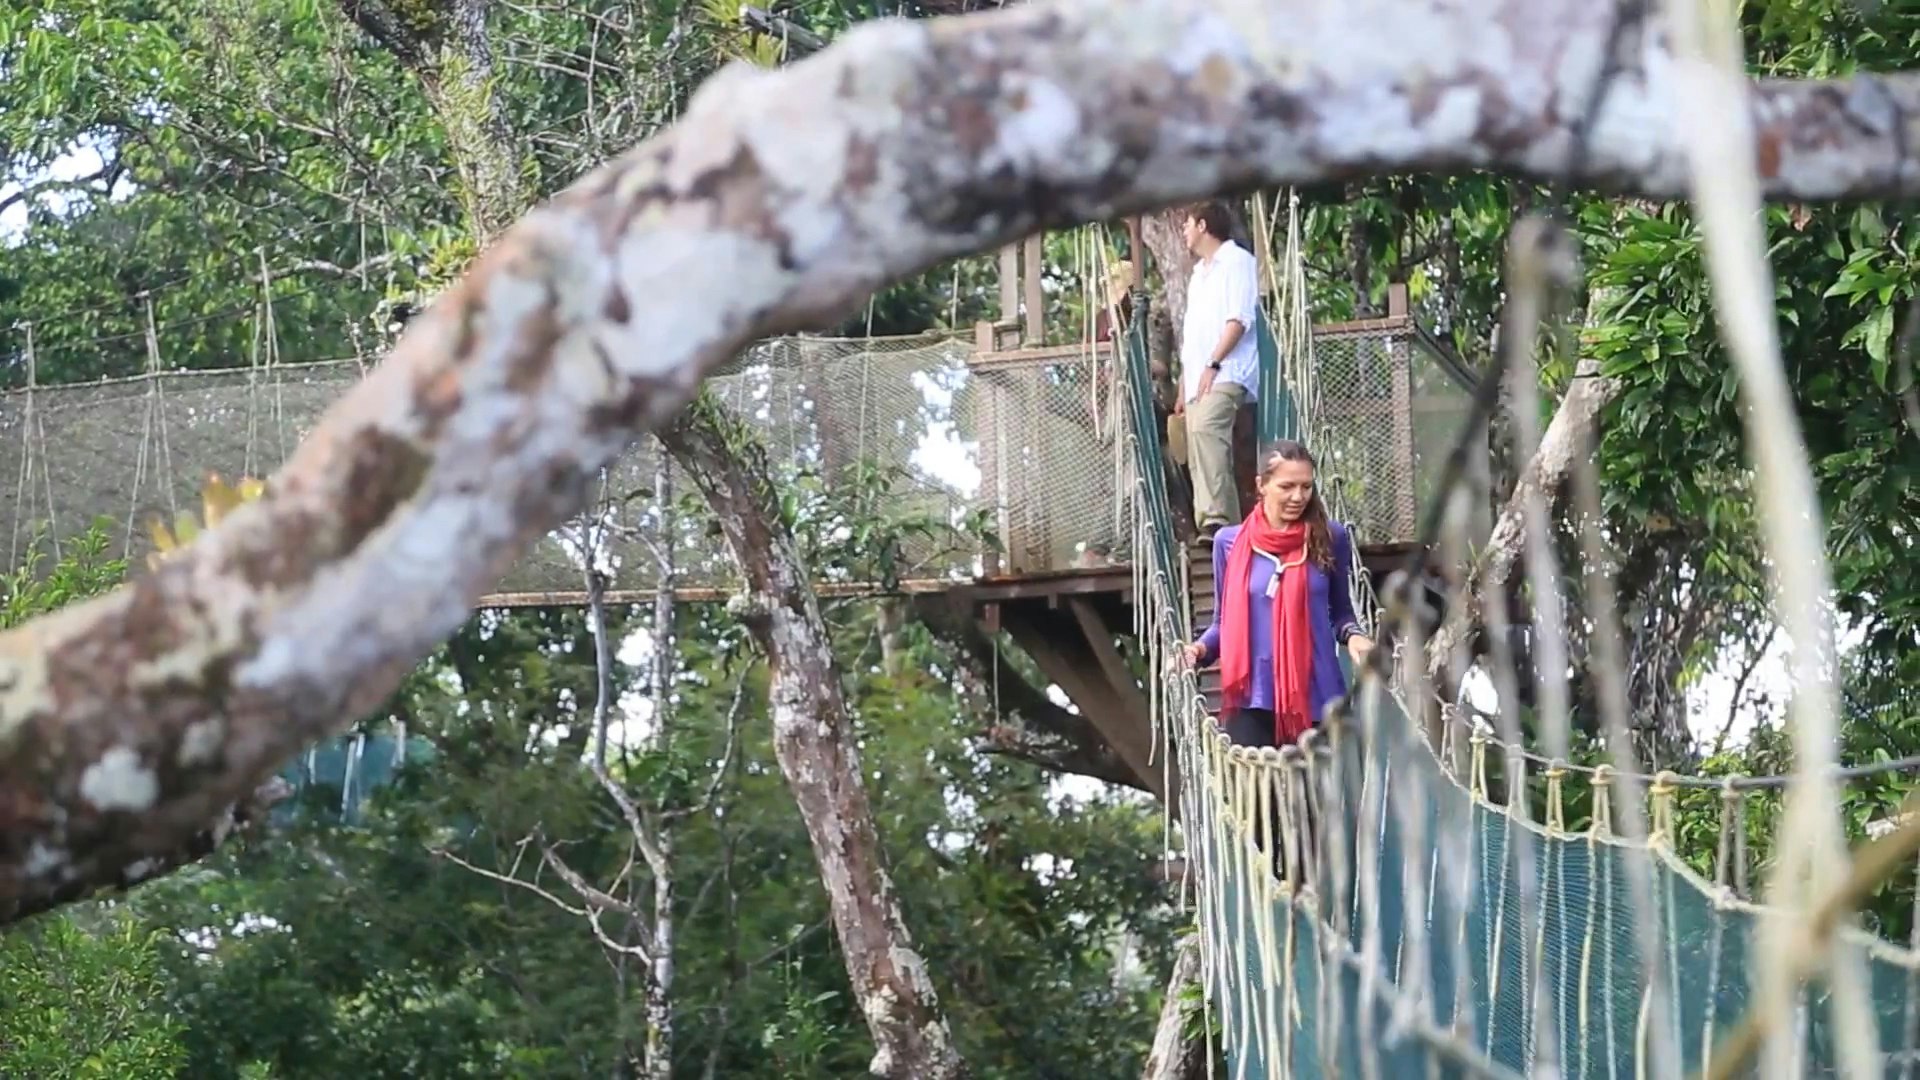 A large branch of a tree cuts across the forest-filled image, below which extends a suspended rope walkway; on the walkway, heading towards the camera, is a woman with a red scarf; a man waits on the platform behind her.